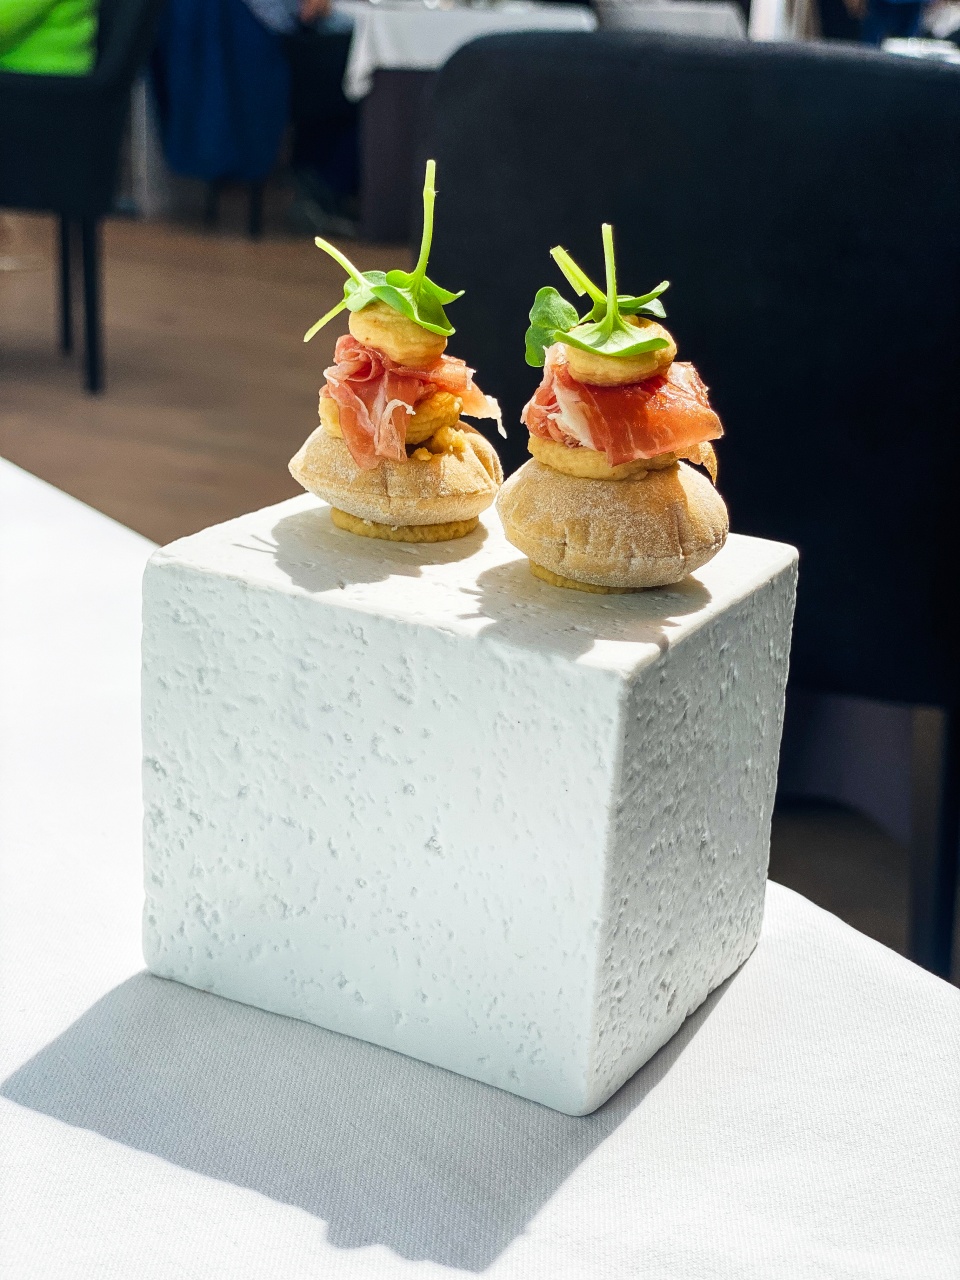 A beautiful presentation of refined appetizers on an elegant platter at De Bakermat restaurant, with each bite carefully prepared to offer a burst of flavor and texture."
